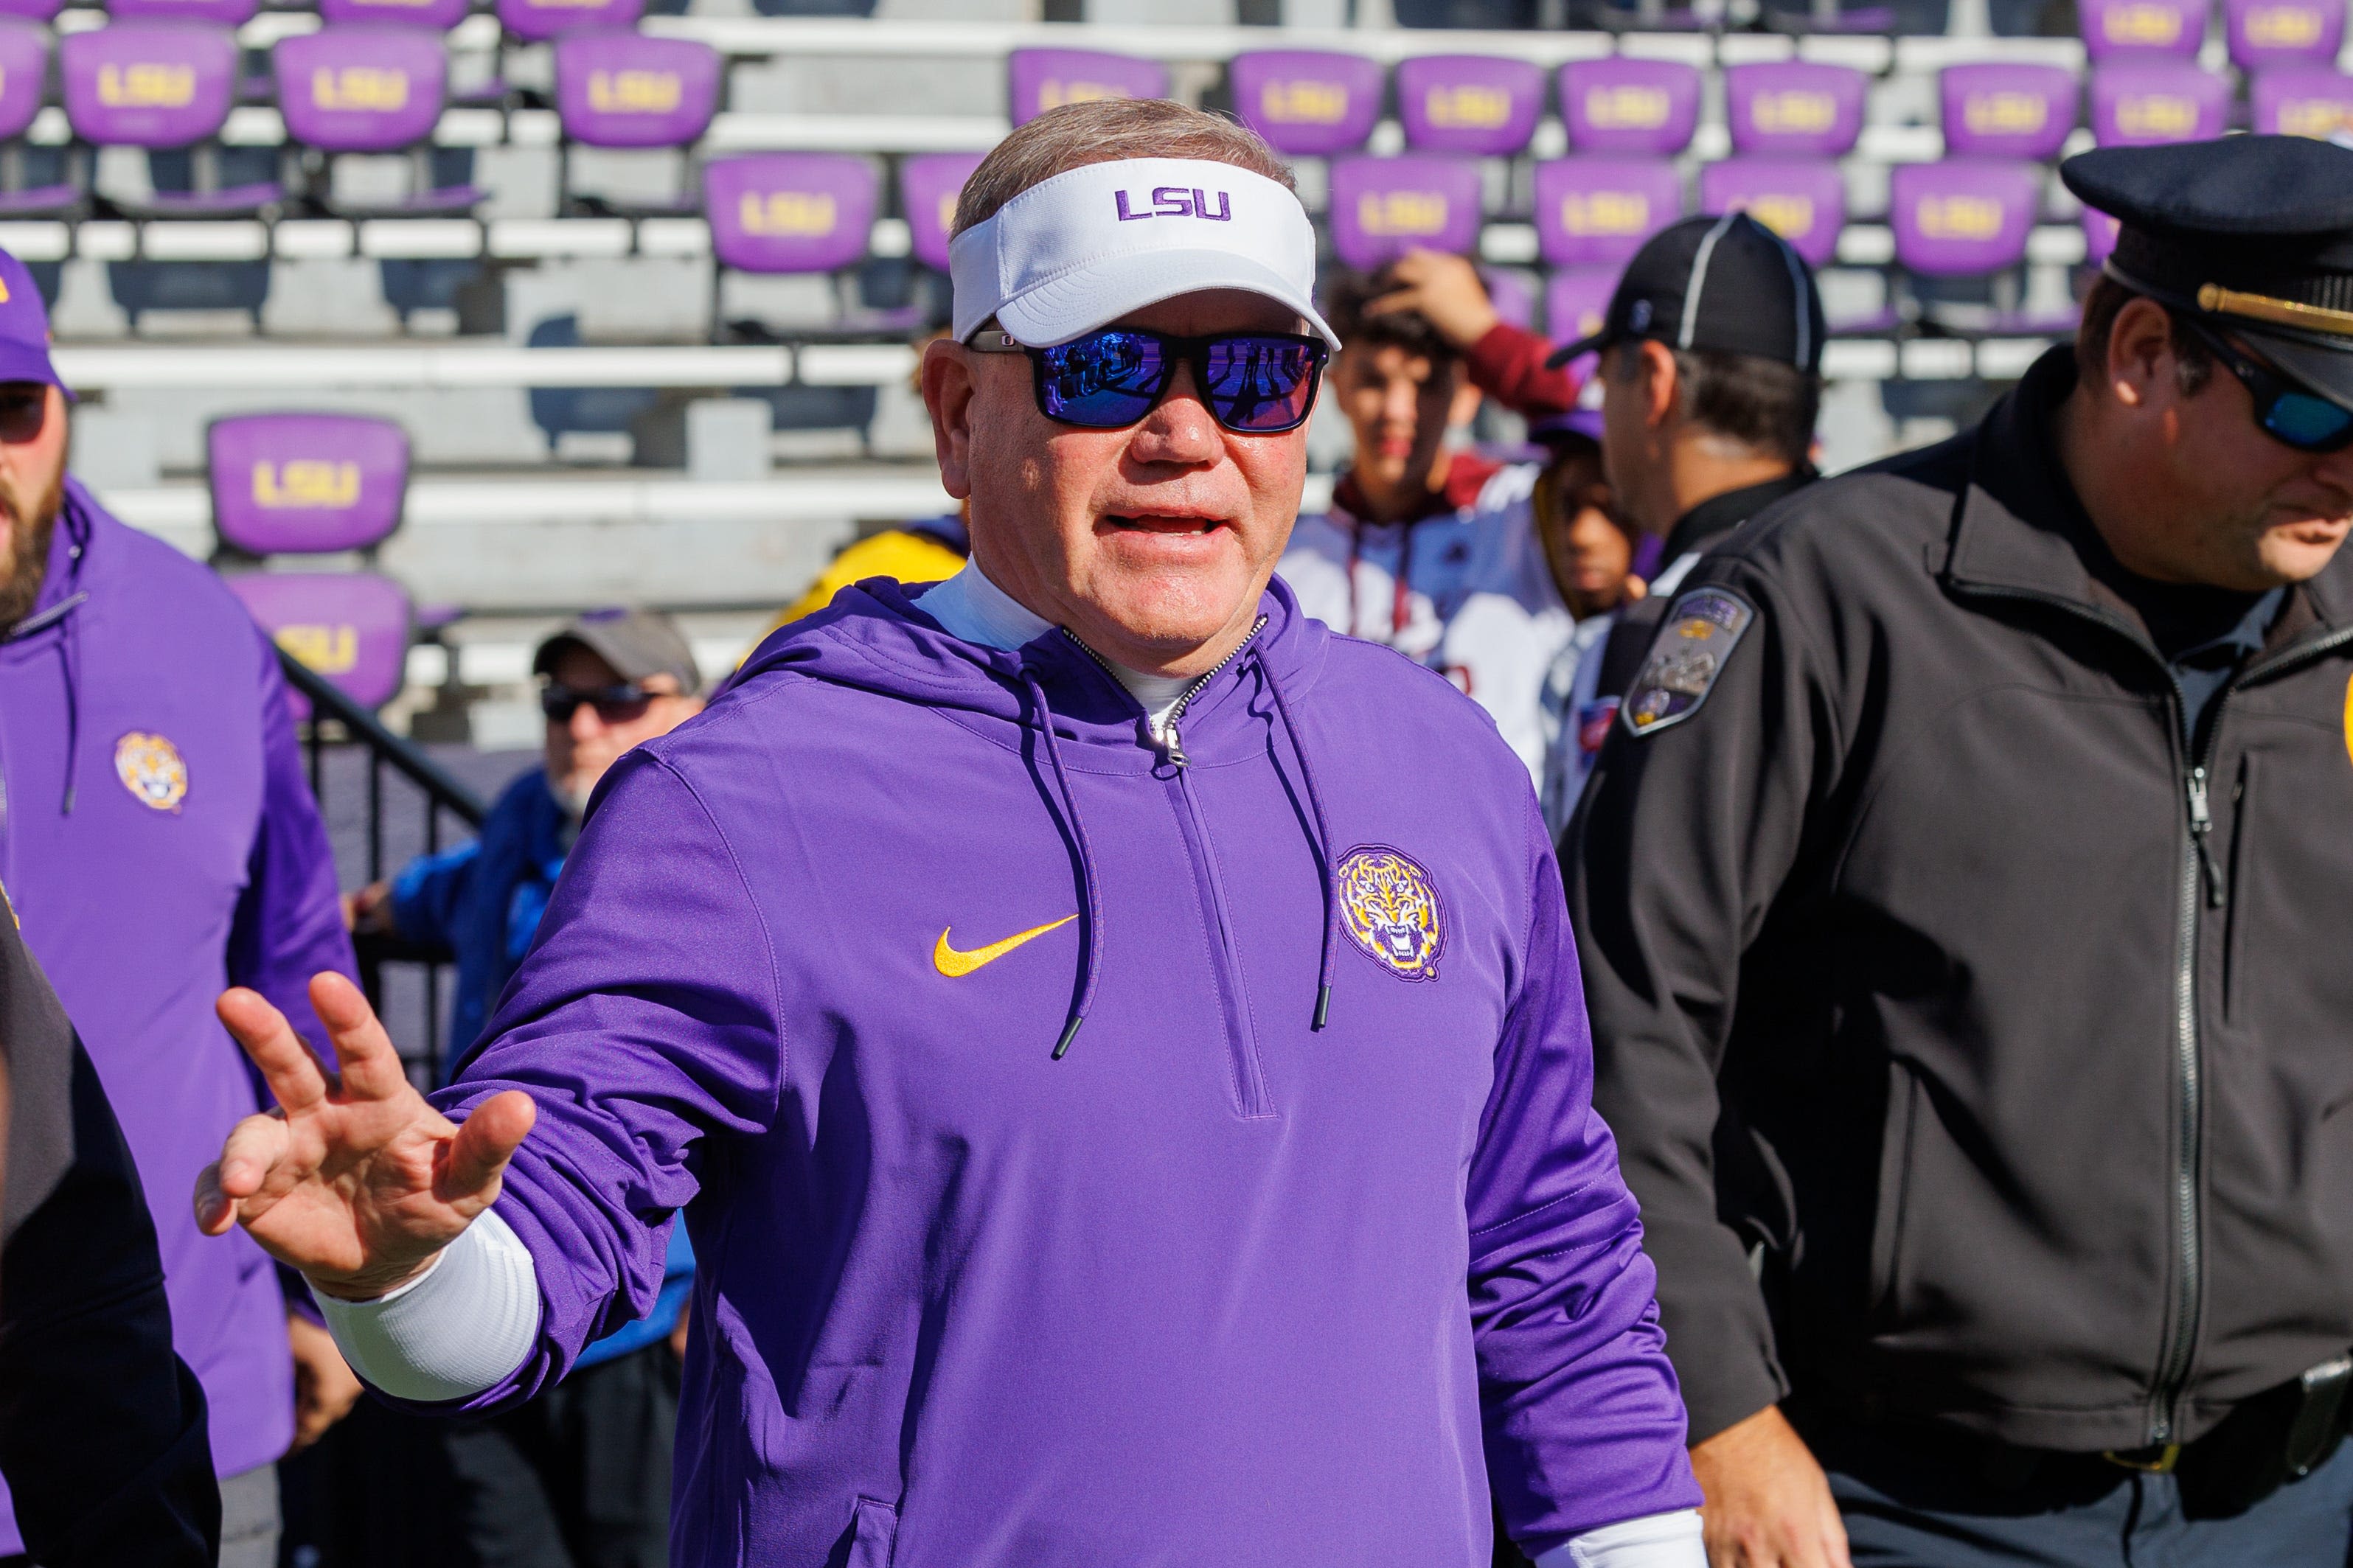 When should LSU football expect Brian Kelly to win national championship? Here's our take